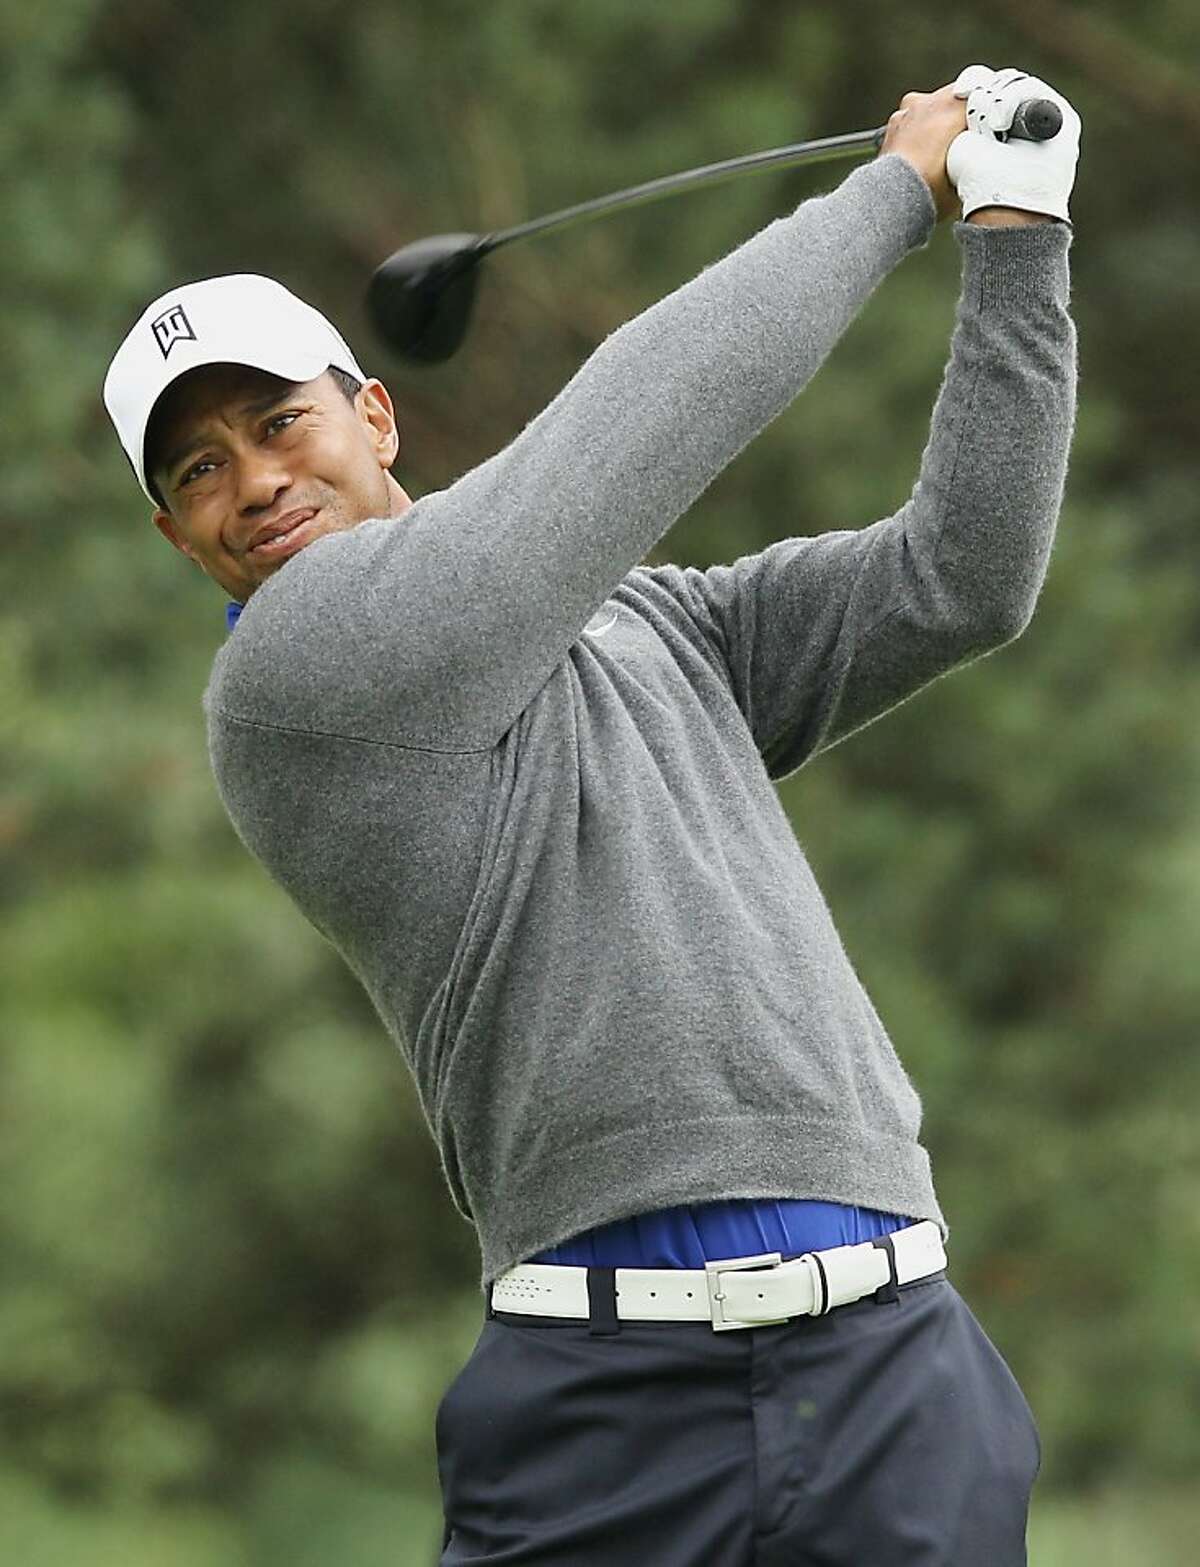 DUBLIN, OH - JUNE 01: Tiger Woods hits his tee shot on the second hole during the second round of the Memorial Tournament presented by Nationwide Insurance at Muirfield Village Golf Club on June1, 2012 in Dublin, Ohio. (Photo by Scott Halleran/Getty Images)